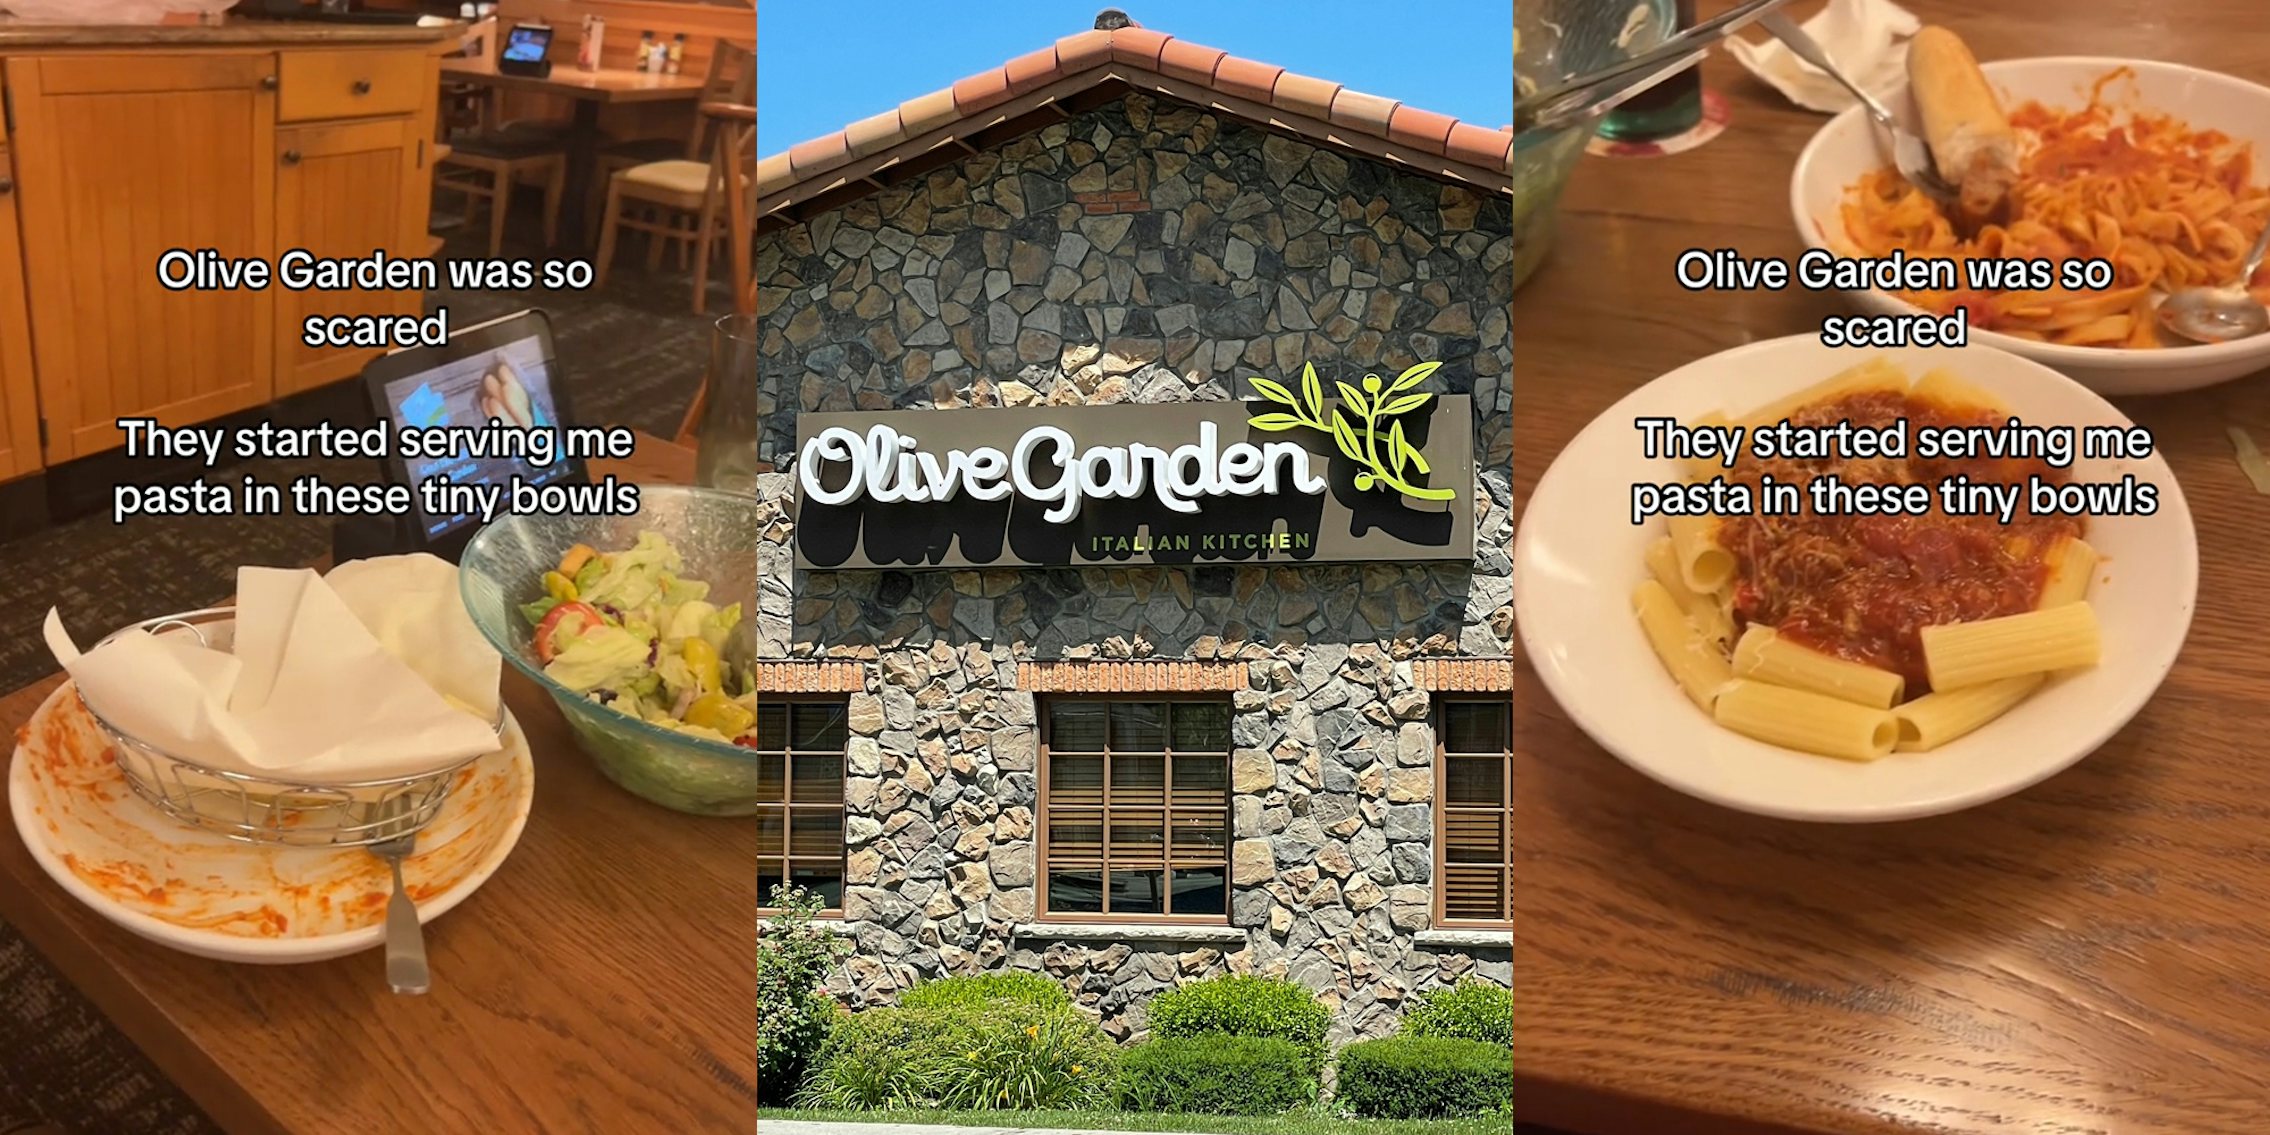 Things You Need to Know Before Eating At Olive Garden